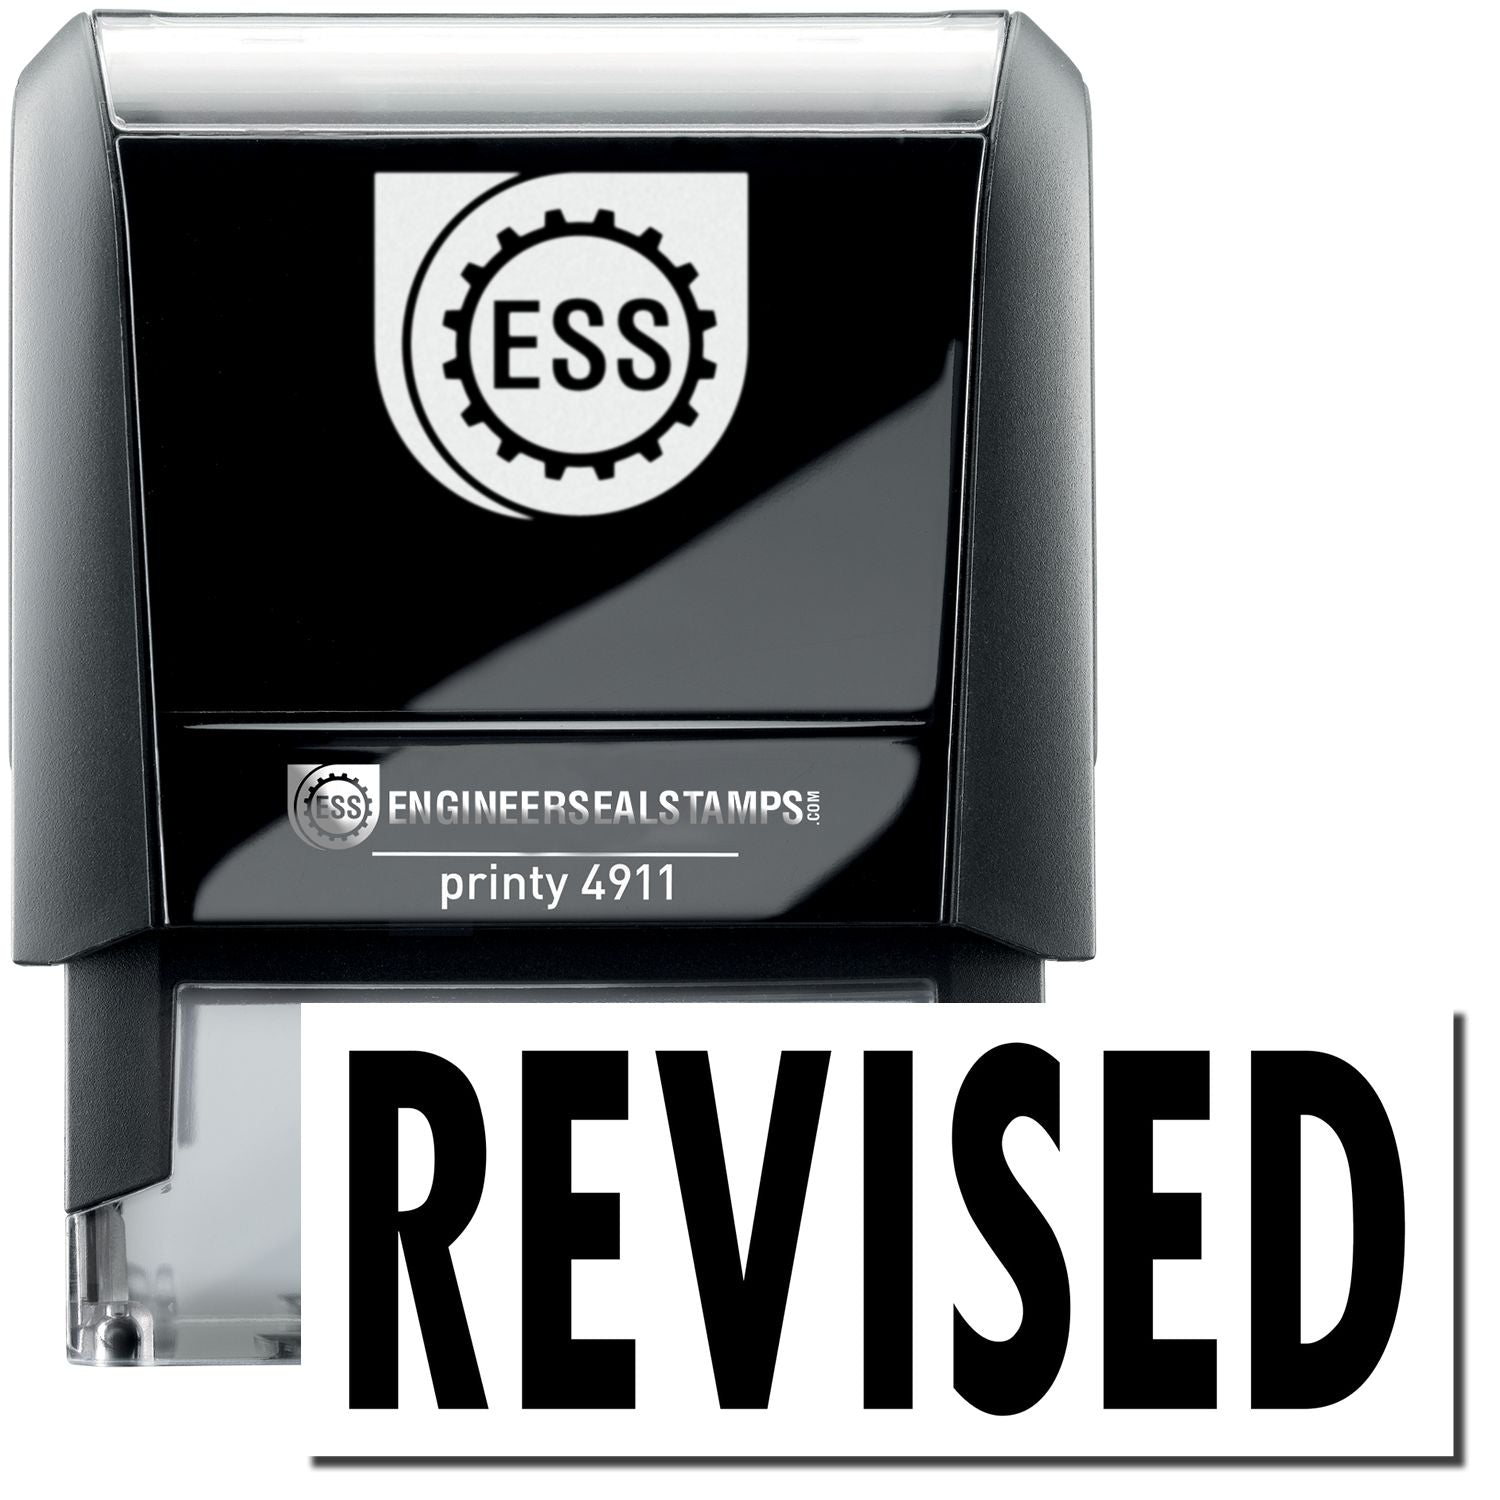 A self-inking stamp with a stamped image showing how the text "REVISED" in bold font is displayed after stamping.